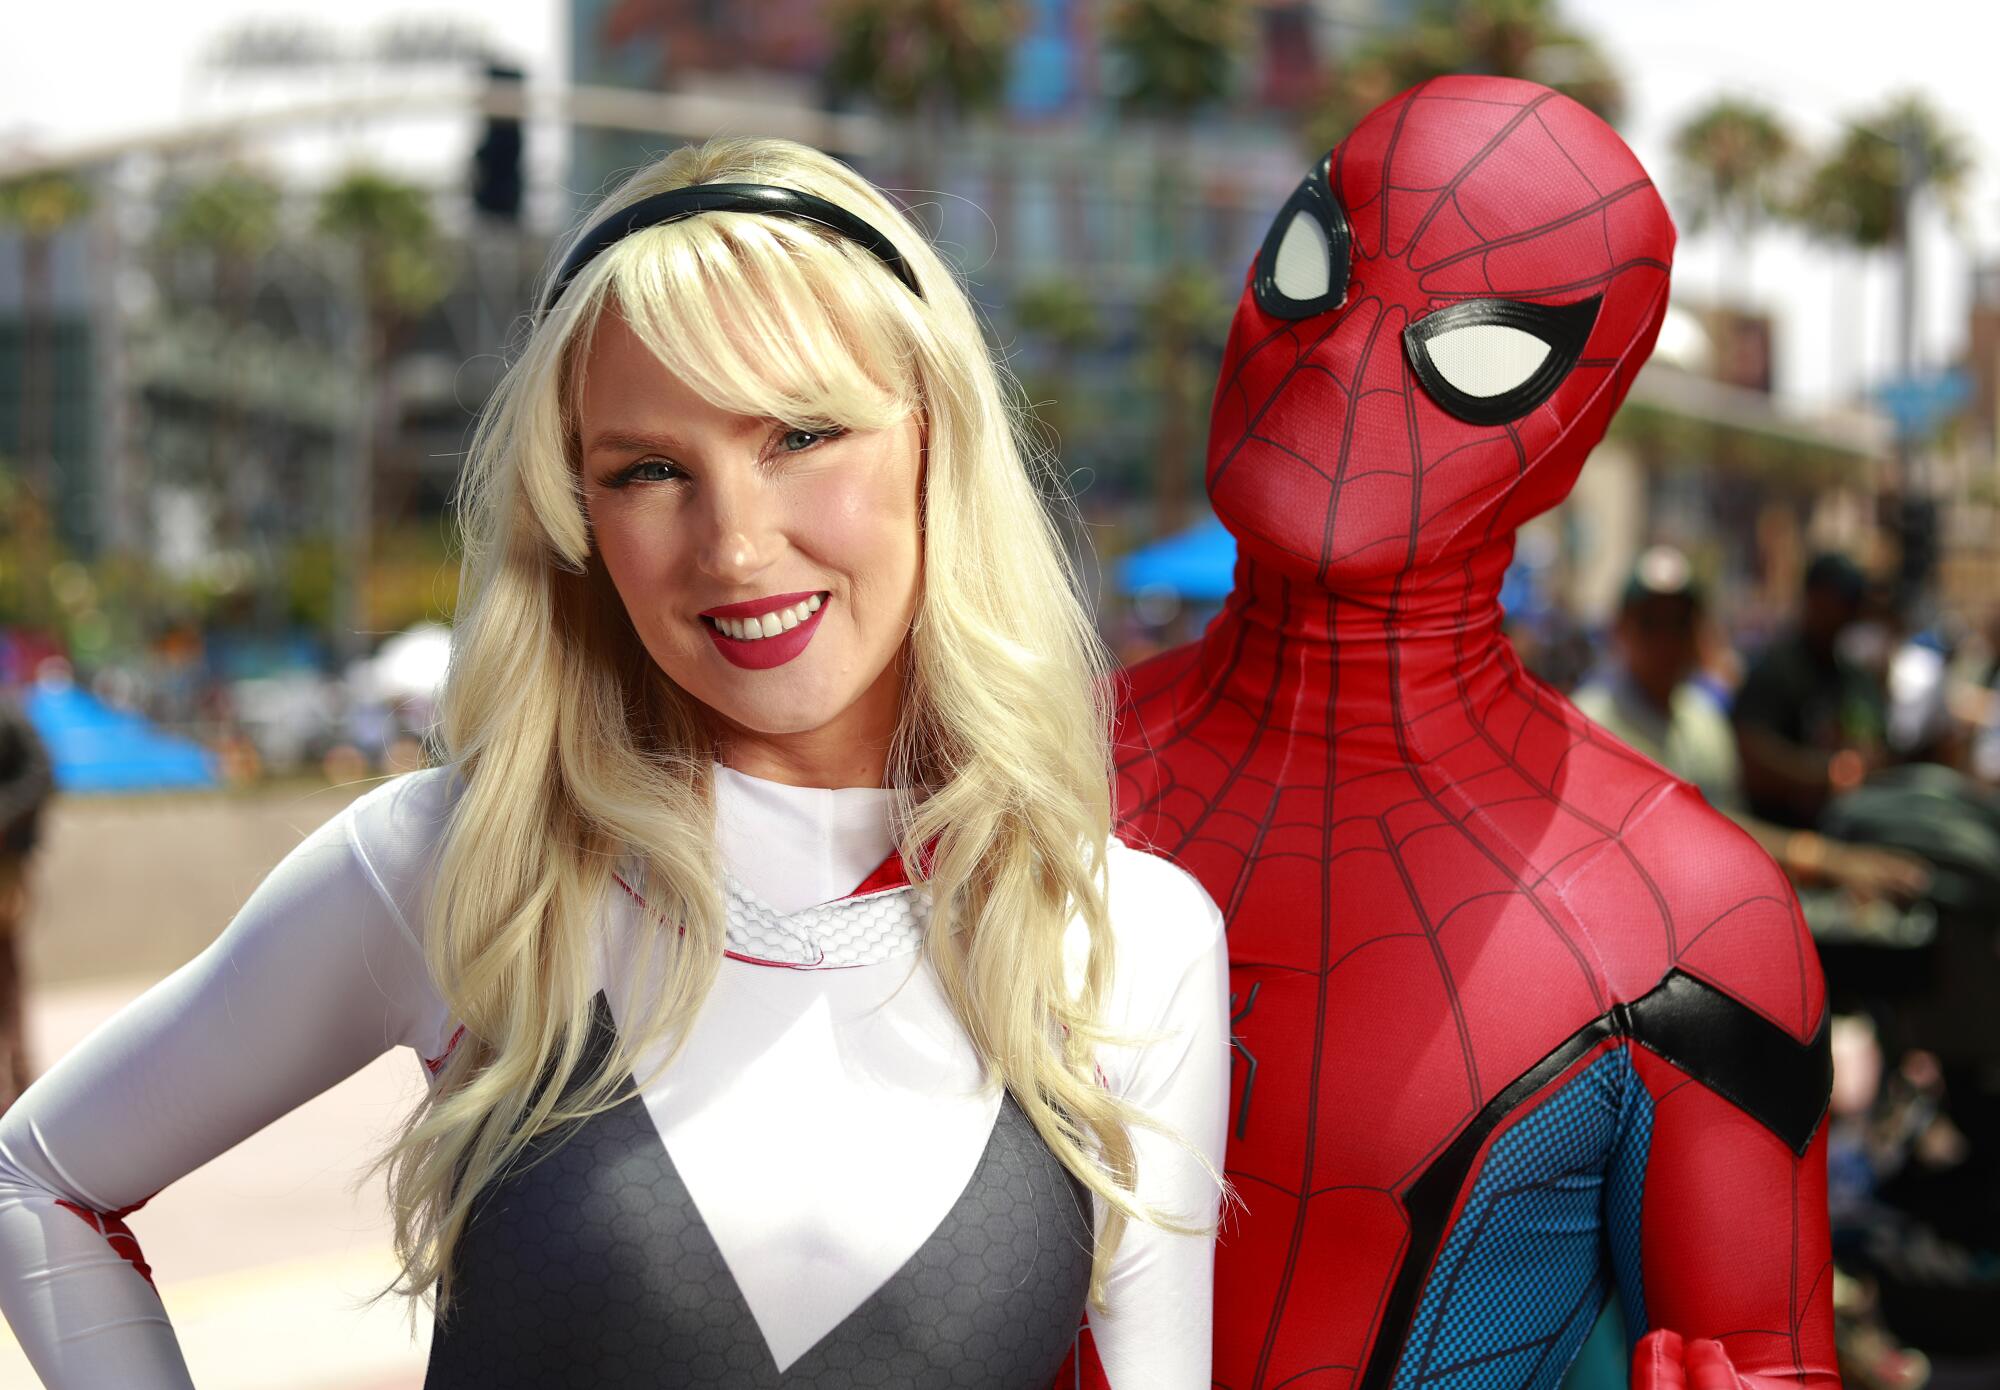 Cherish McConnell and husband Valor of San Diego dressed as Gwen Stacy Spider-Woman and Spider-Man.